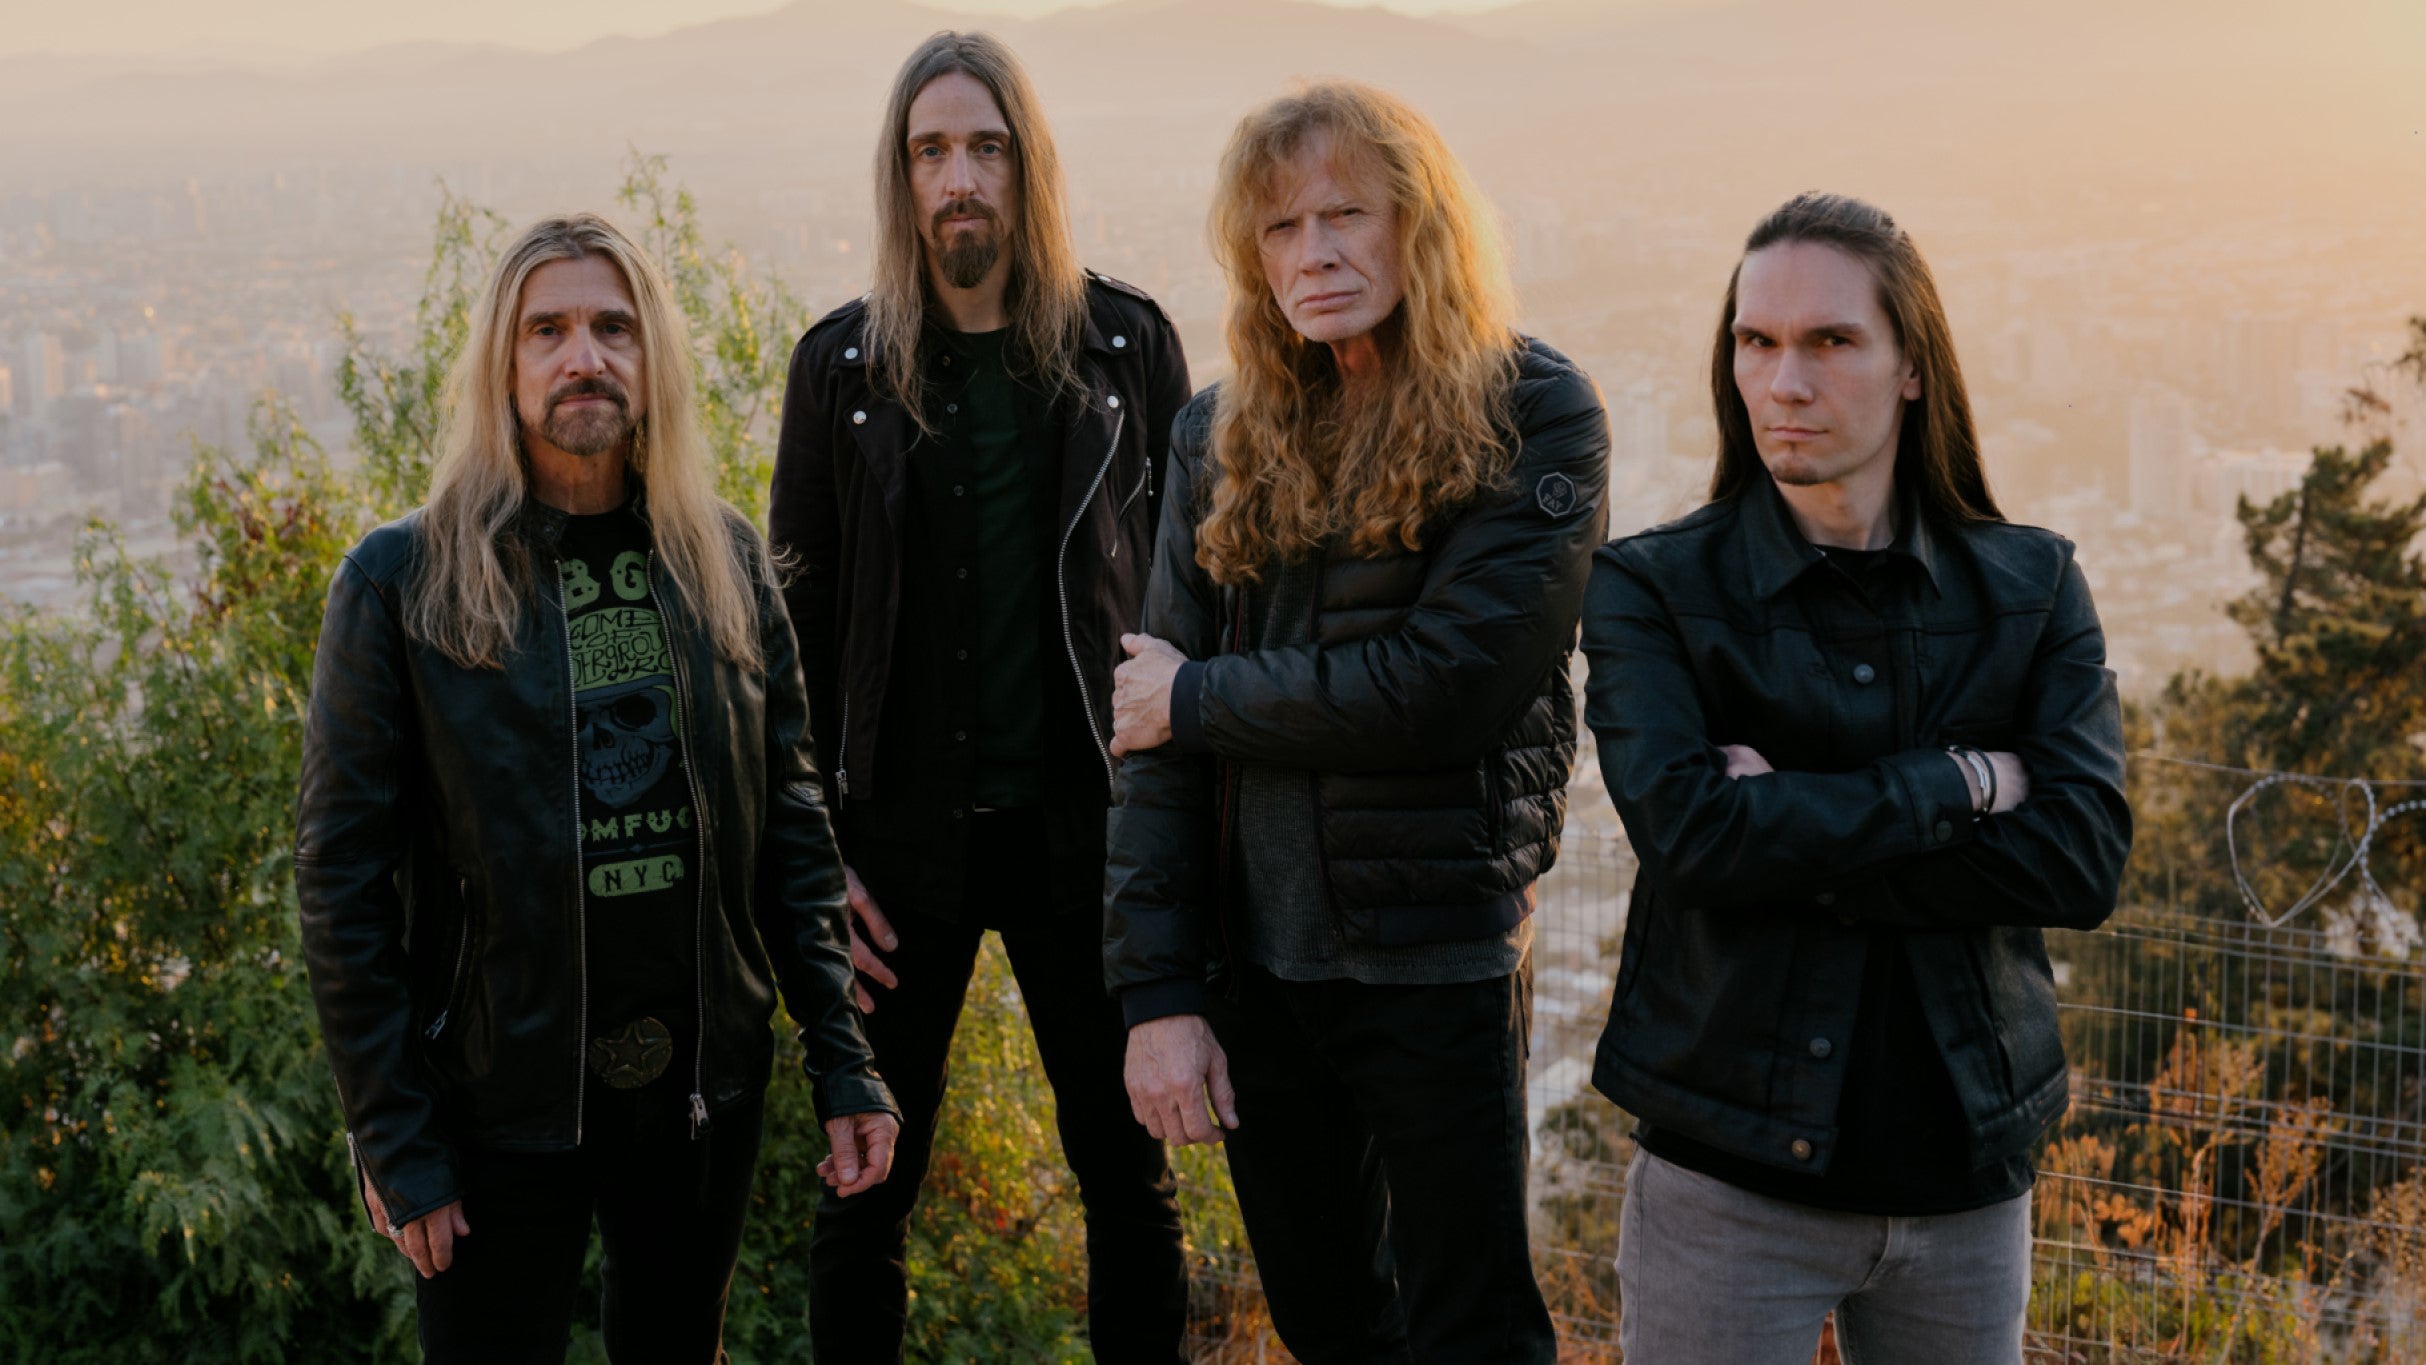 Megadeth - Destroy All Enemies Tour pre-sale code for advance tickets in Huntington